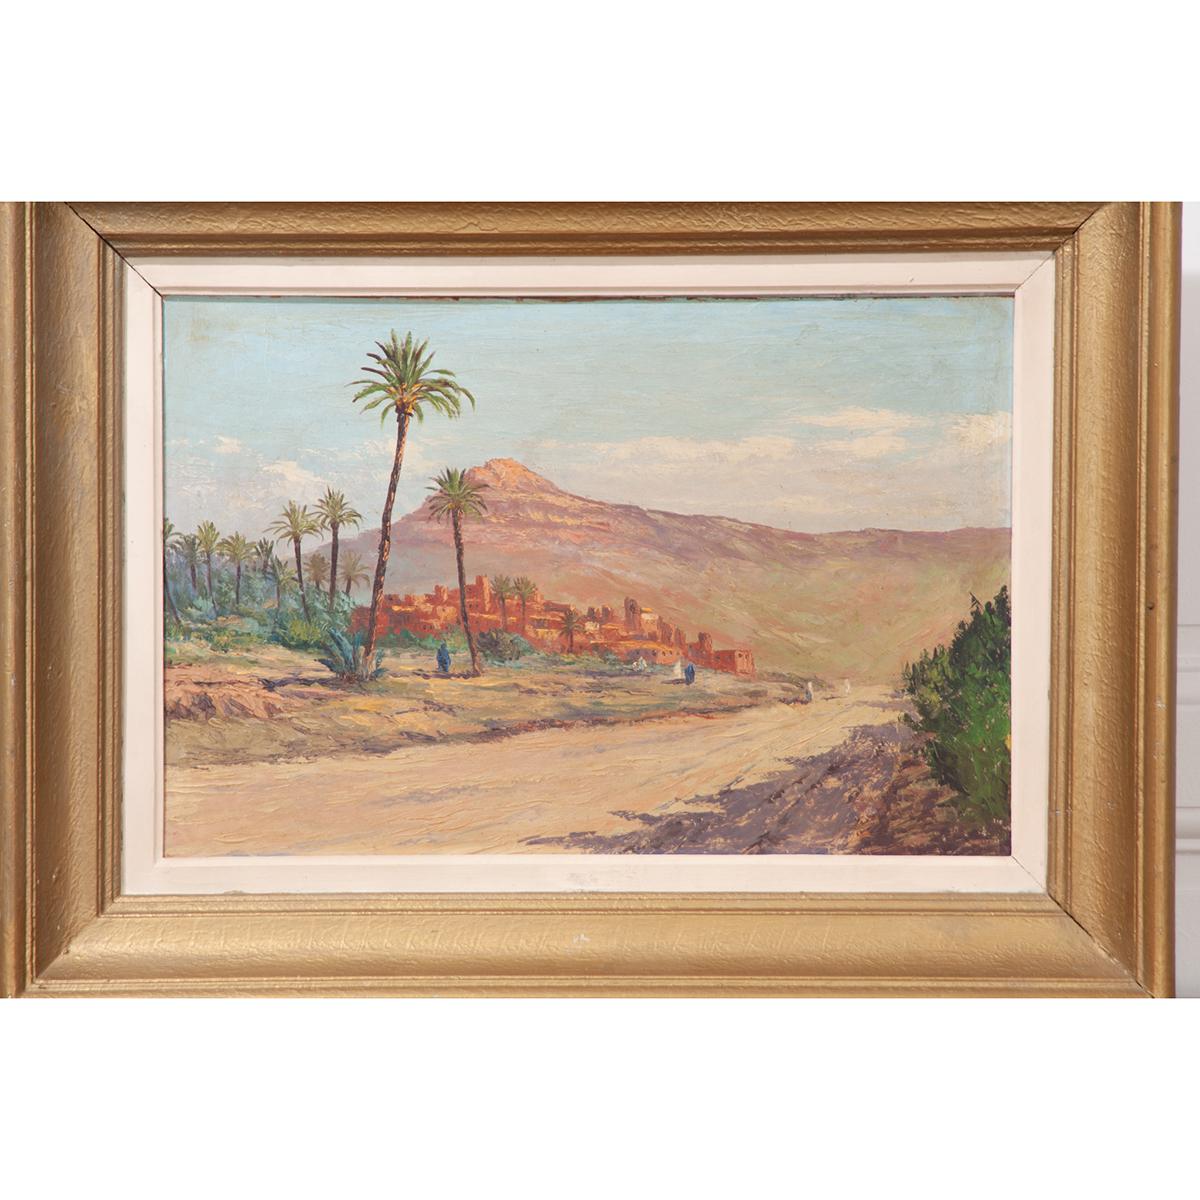 A beautiful, matted and framed landscape painting on board depicting a rural road leading to a small city with mountains in the background.